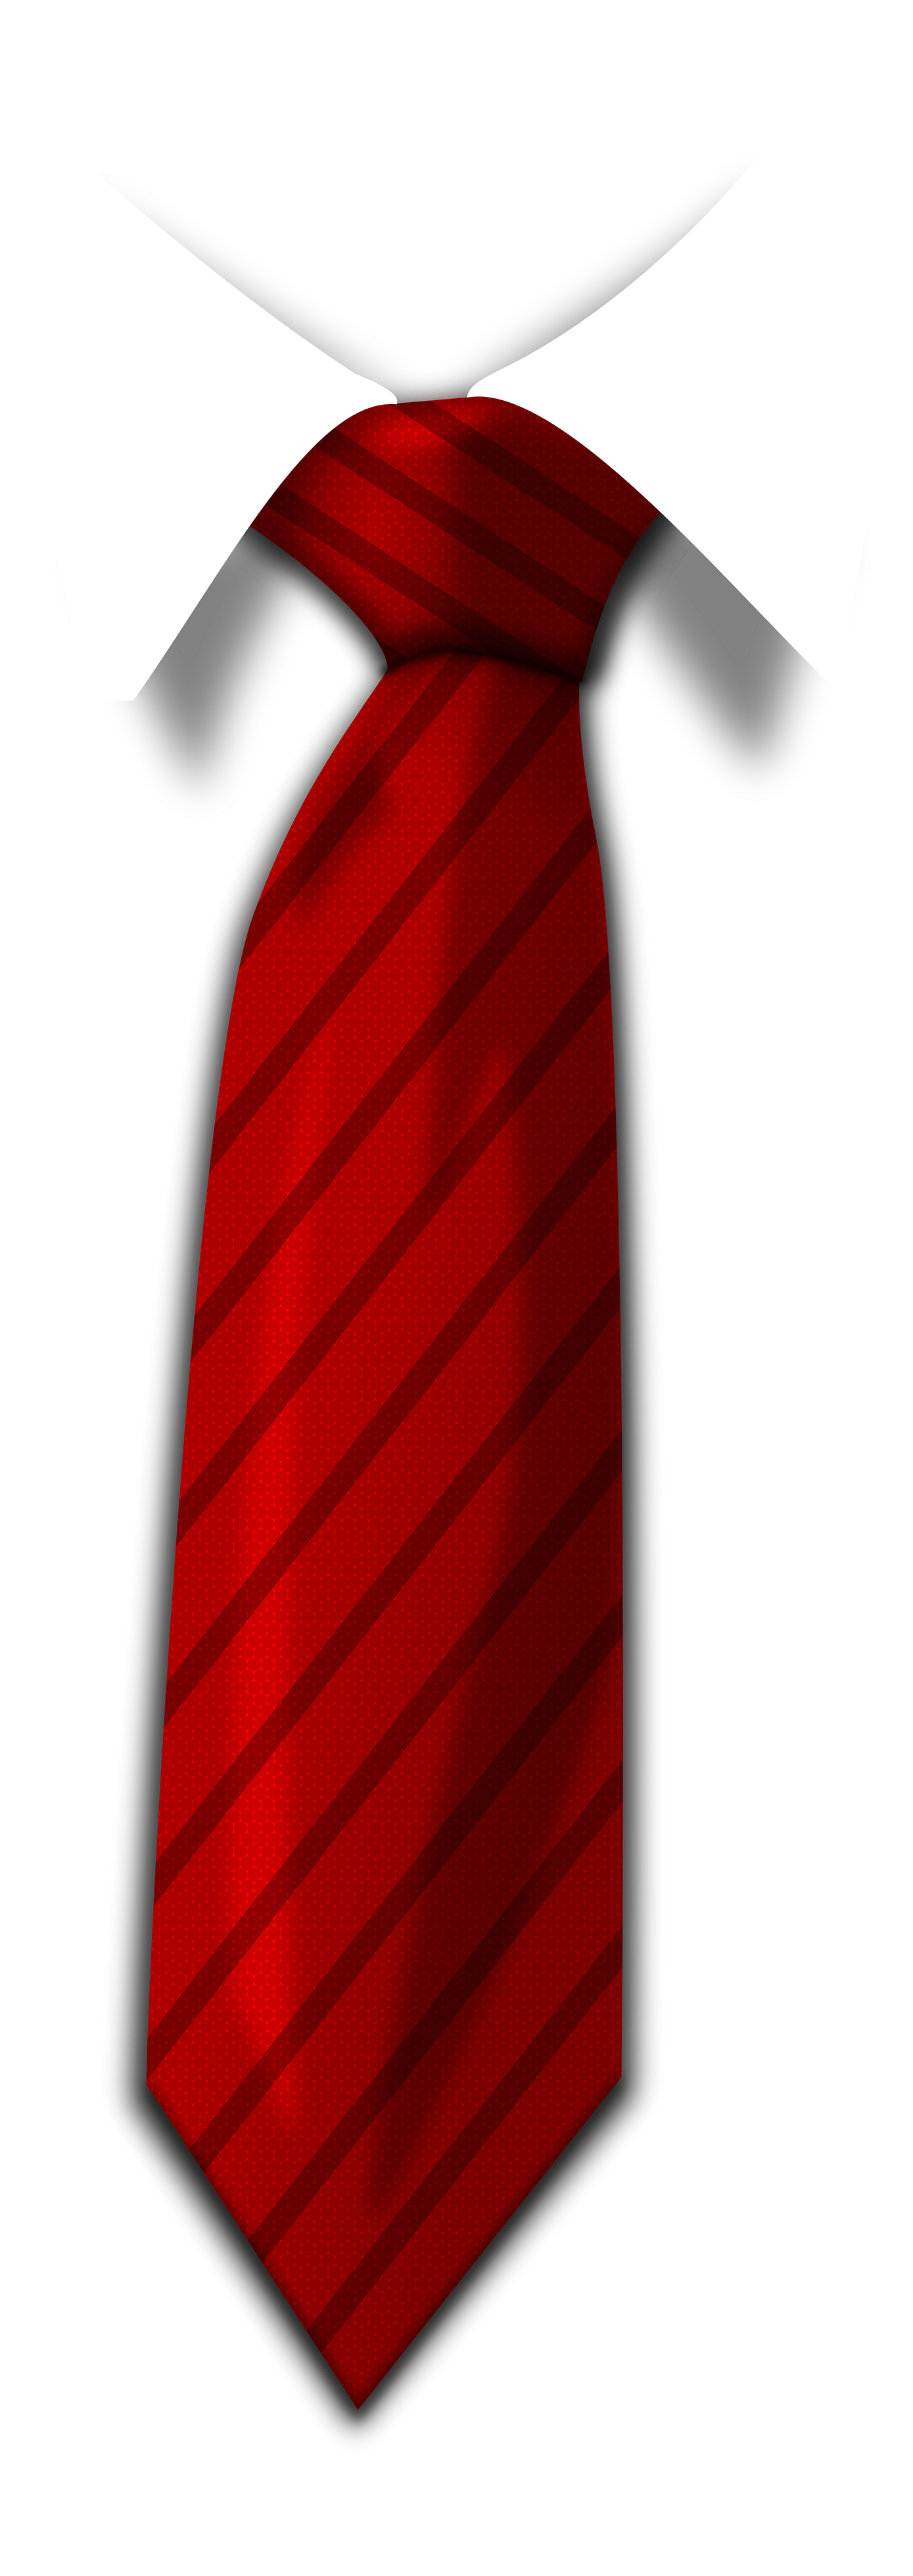 Red Tie PNG Picture pngteam.com